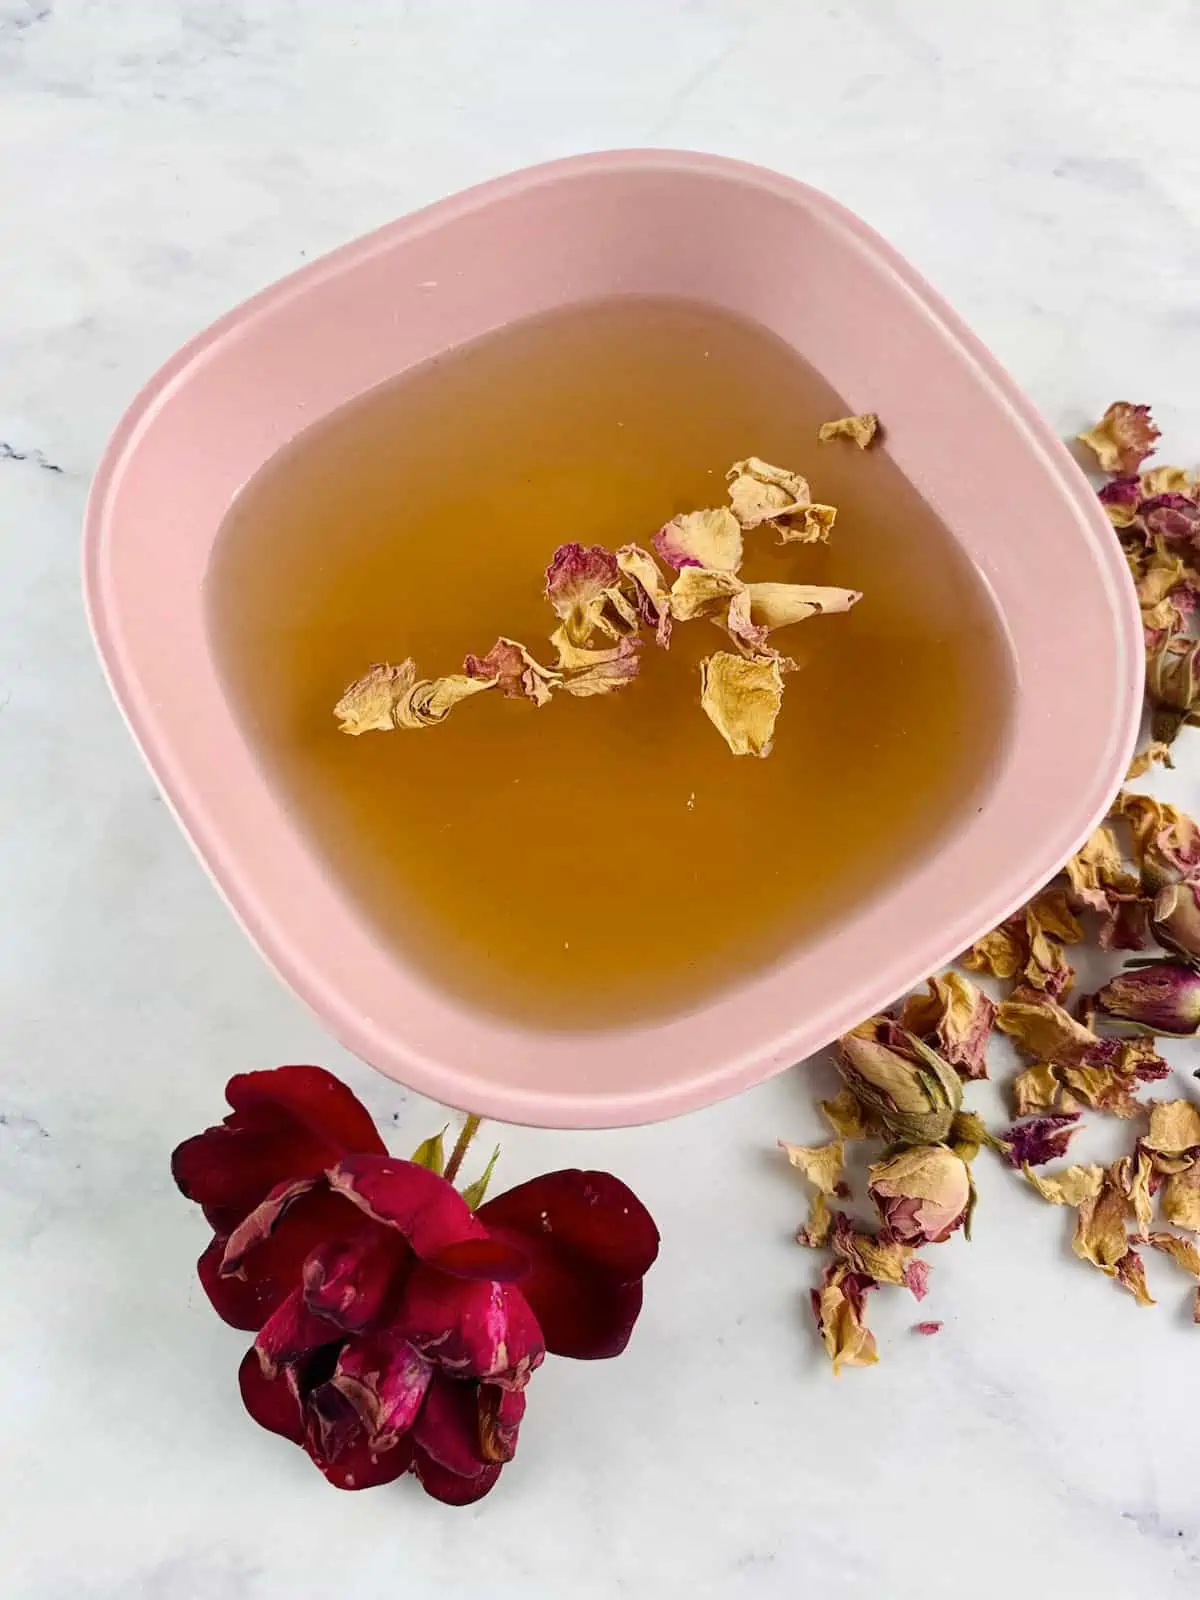 CARDAMOM SYRUP IN A PINK BOWL WITH ROSE & ROSE PETALS ON THE SIDE